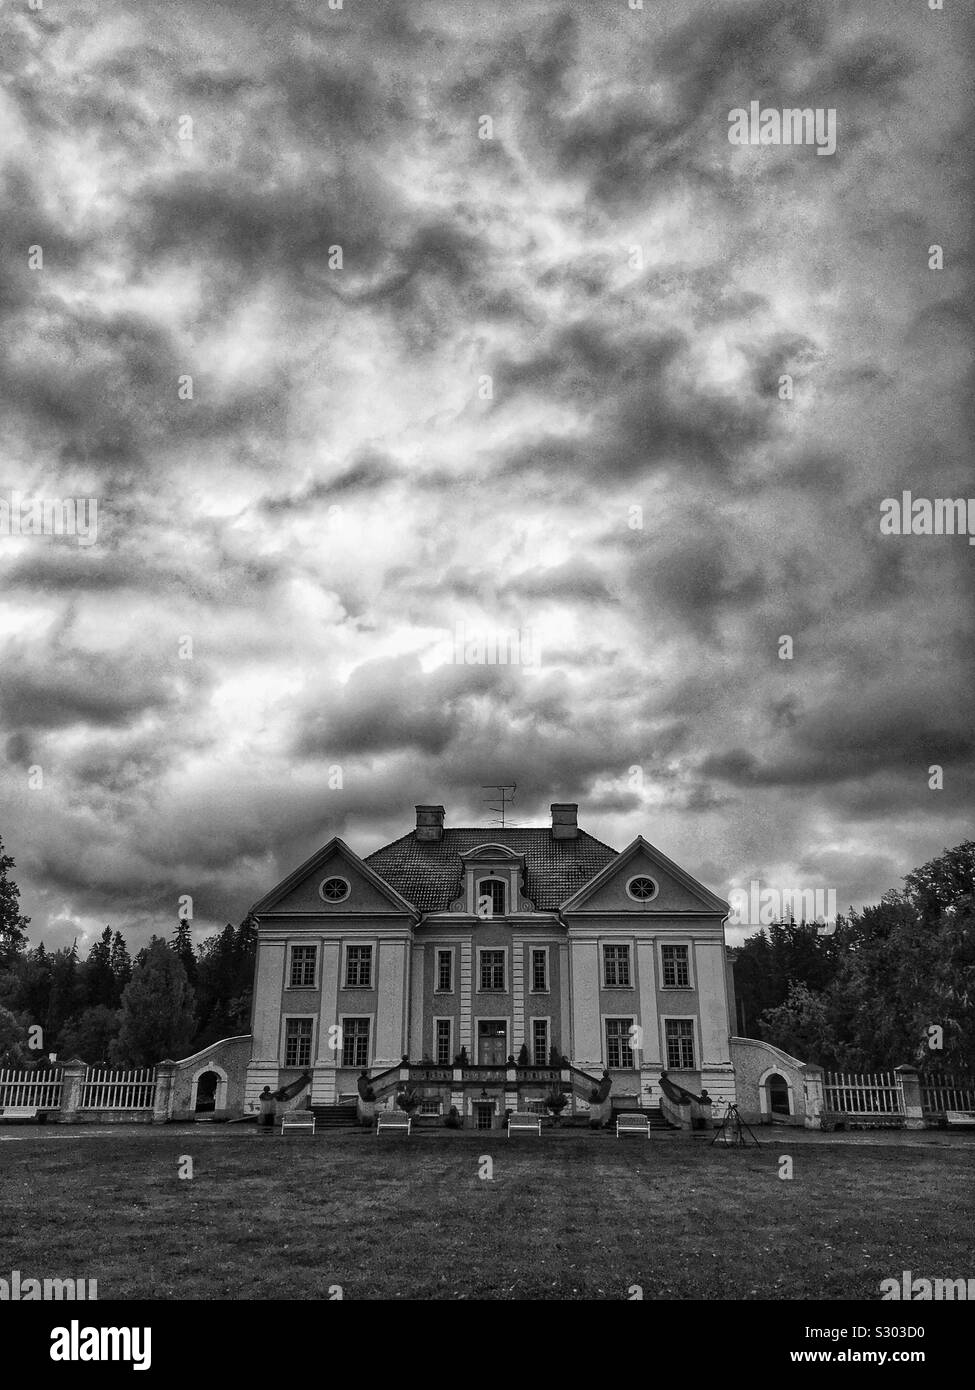 Palmse Manor is one of the grandest baroque mansions in Estonia. The mansion and open-air museum were the first fully restored manor complex in the country. Stock Photo